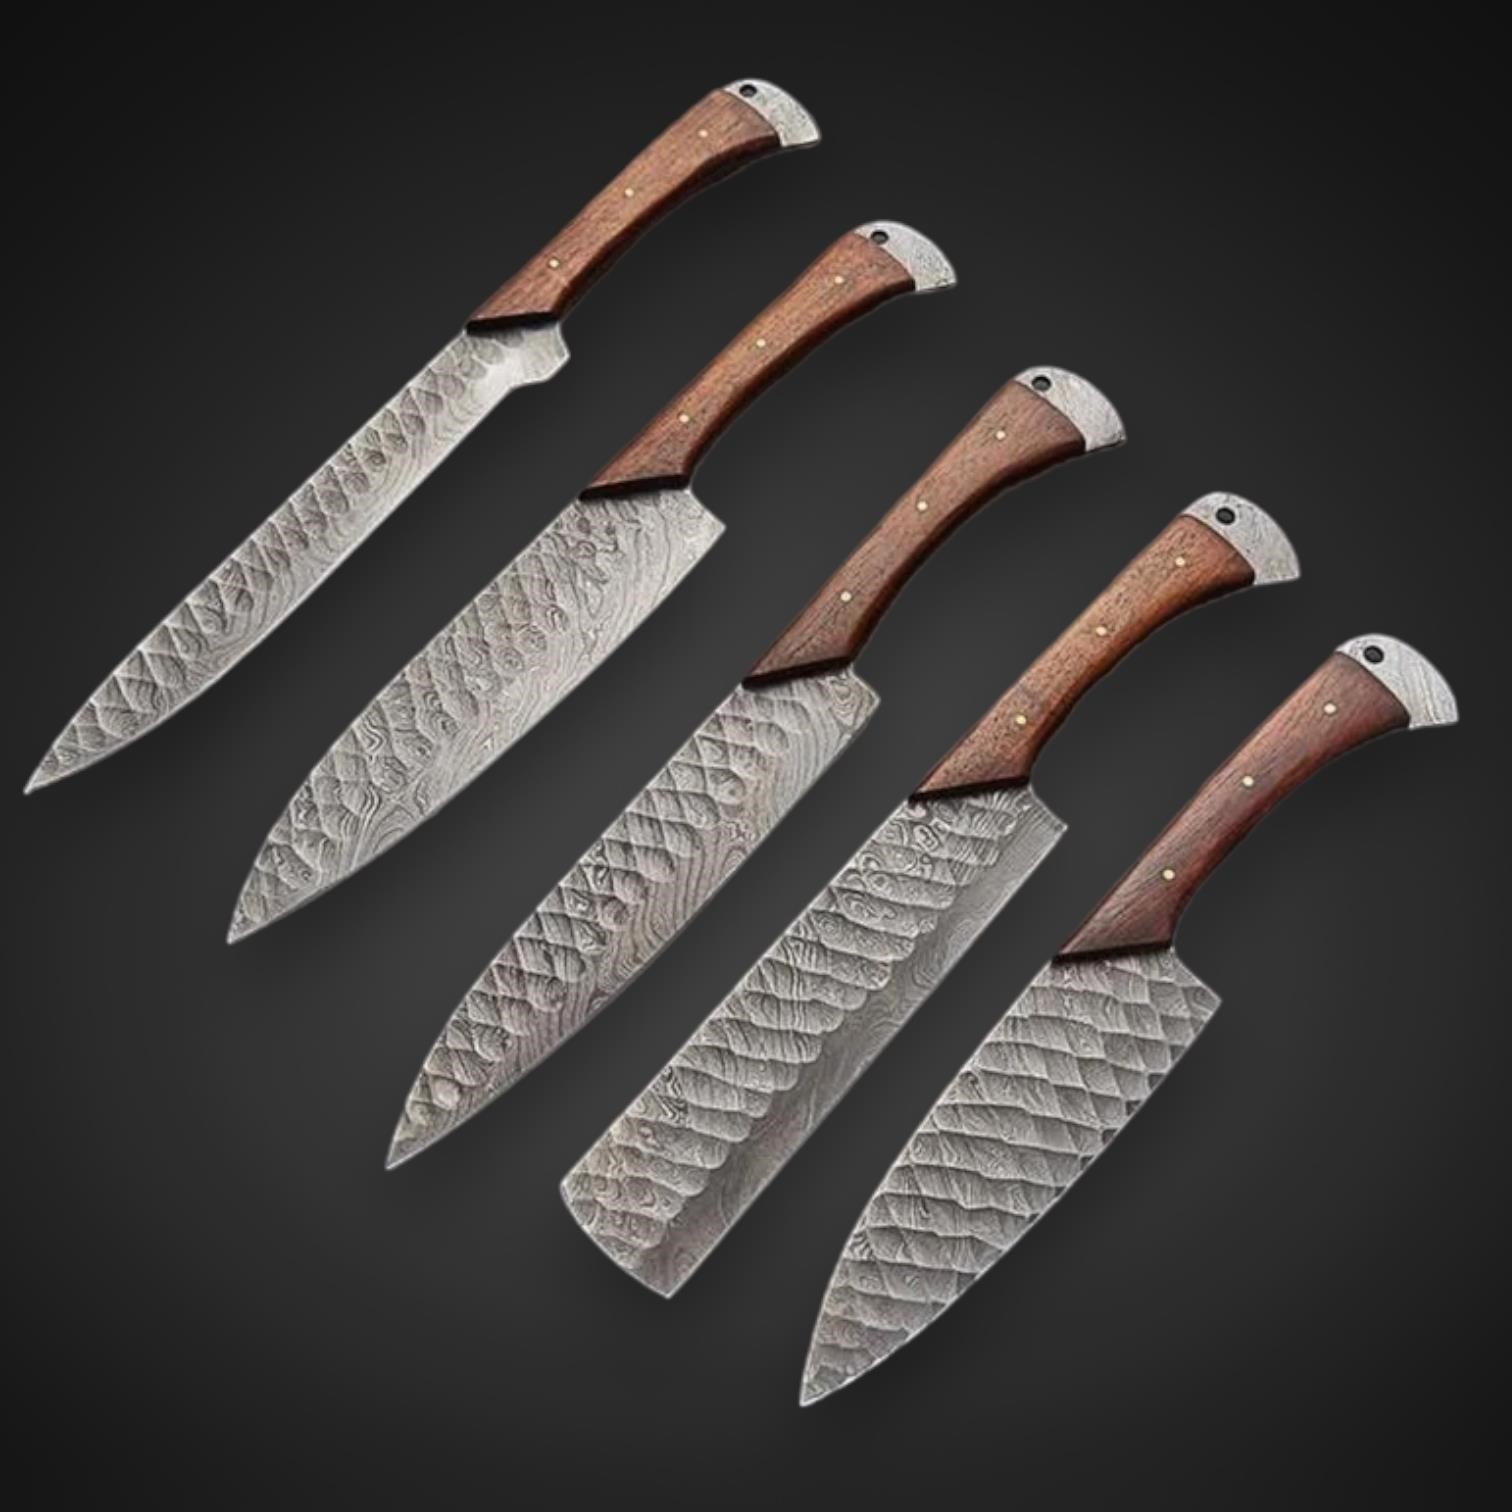 02/23 @8pm AUTHENTIC DAMASCUS STEEL, KNIVES, SWORDS, AXES